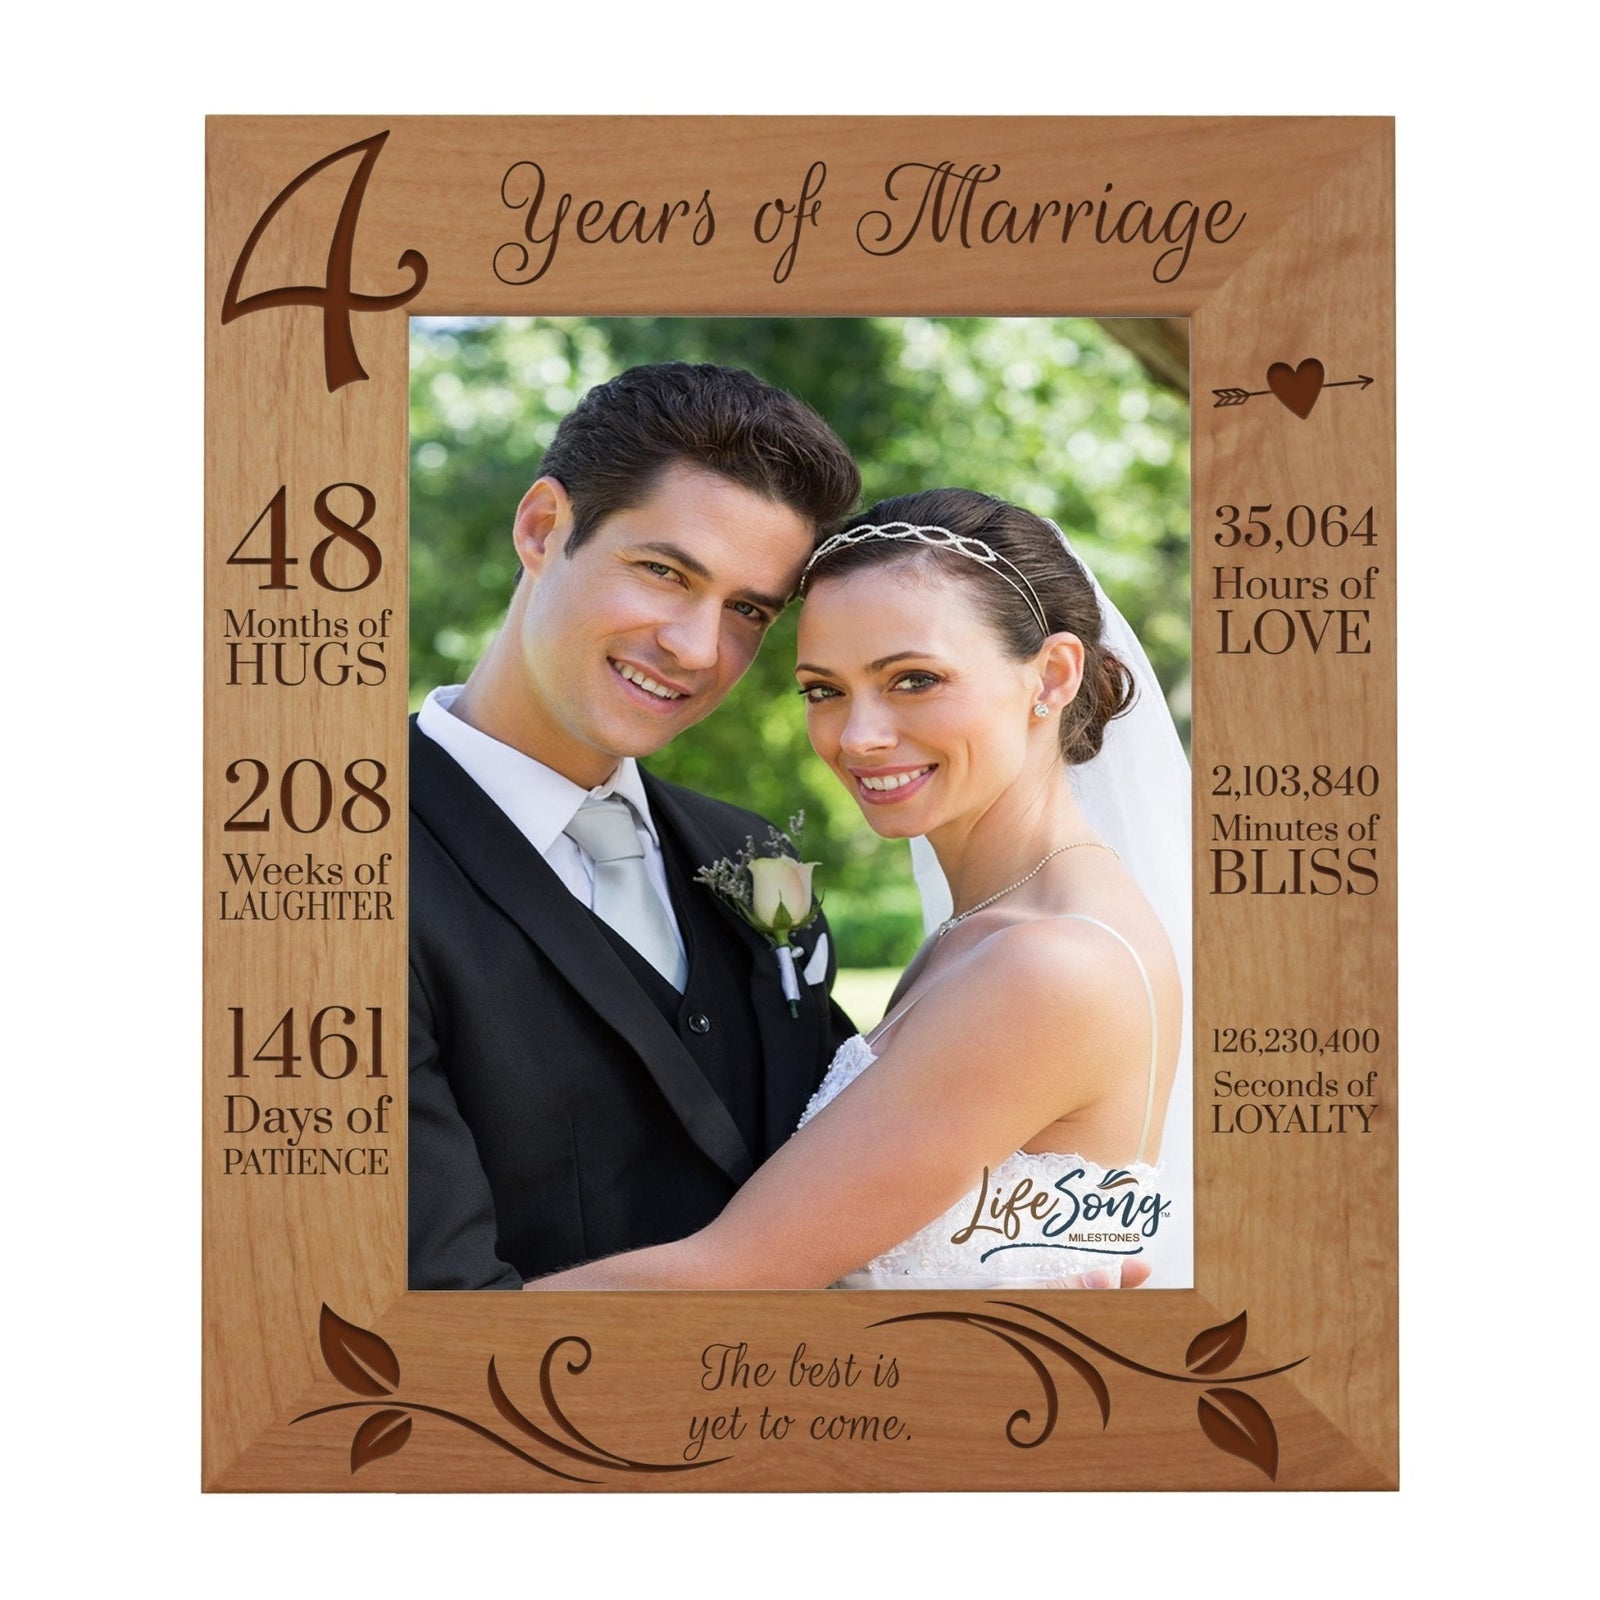 Couples 4th Wedding Anniversary Photo Frame Home Decor Gift Ideas - The Best Is Yet To Come - LifeSong Milestones